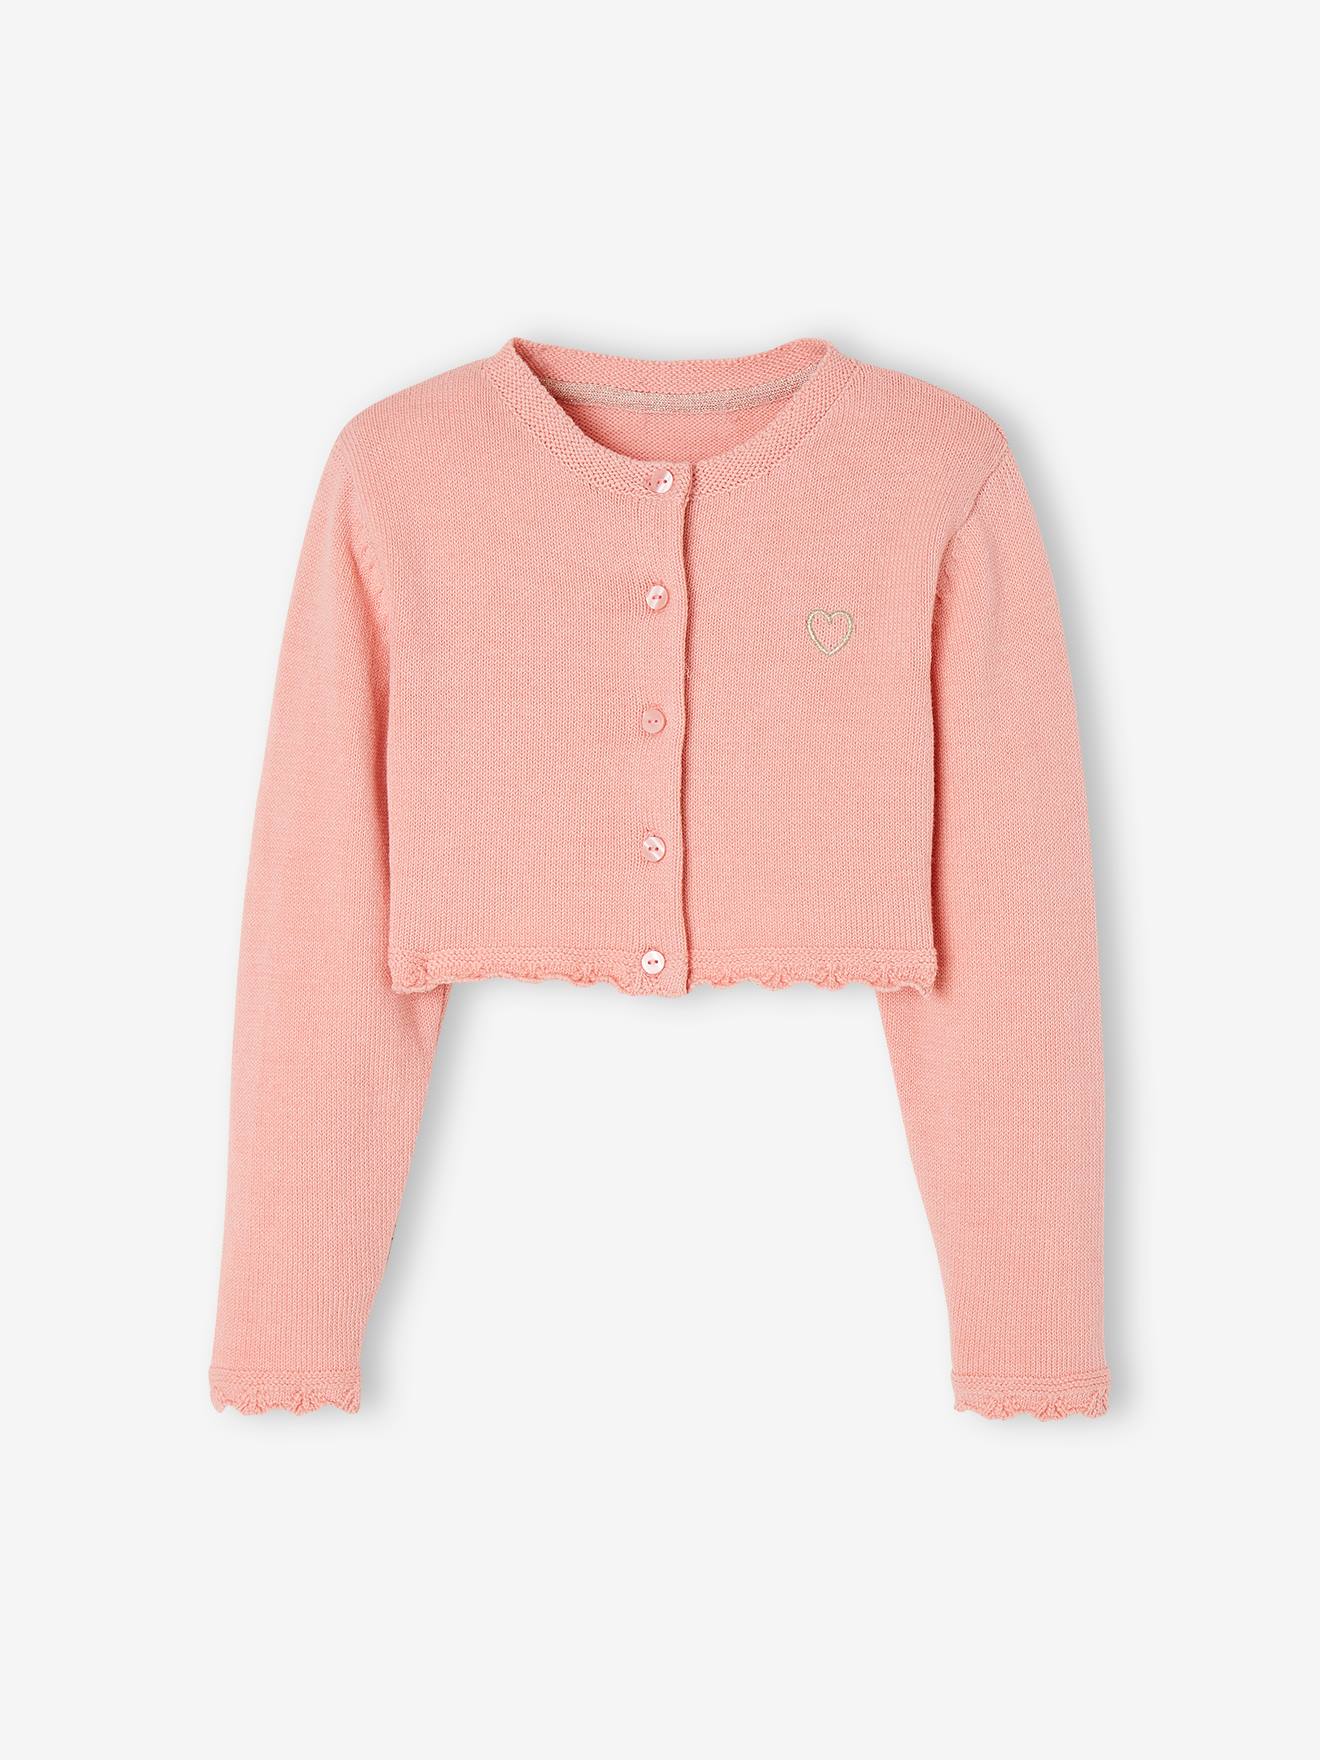 Cropped Openwork Cardigan for Girls sweet pink